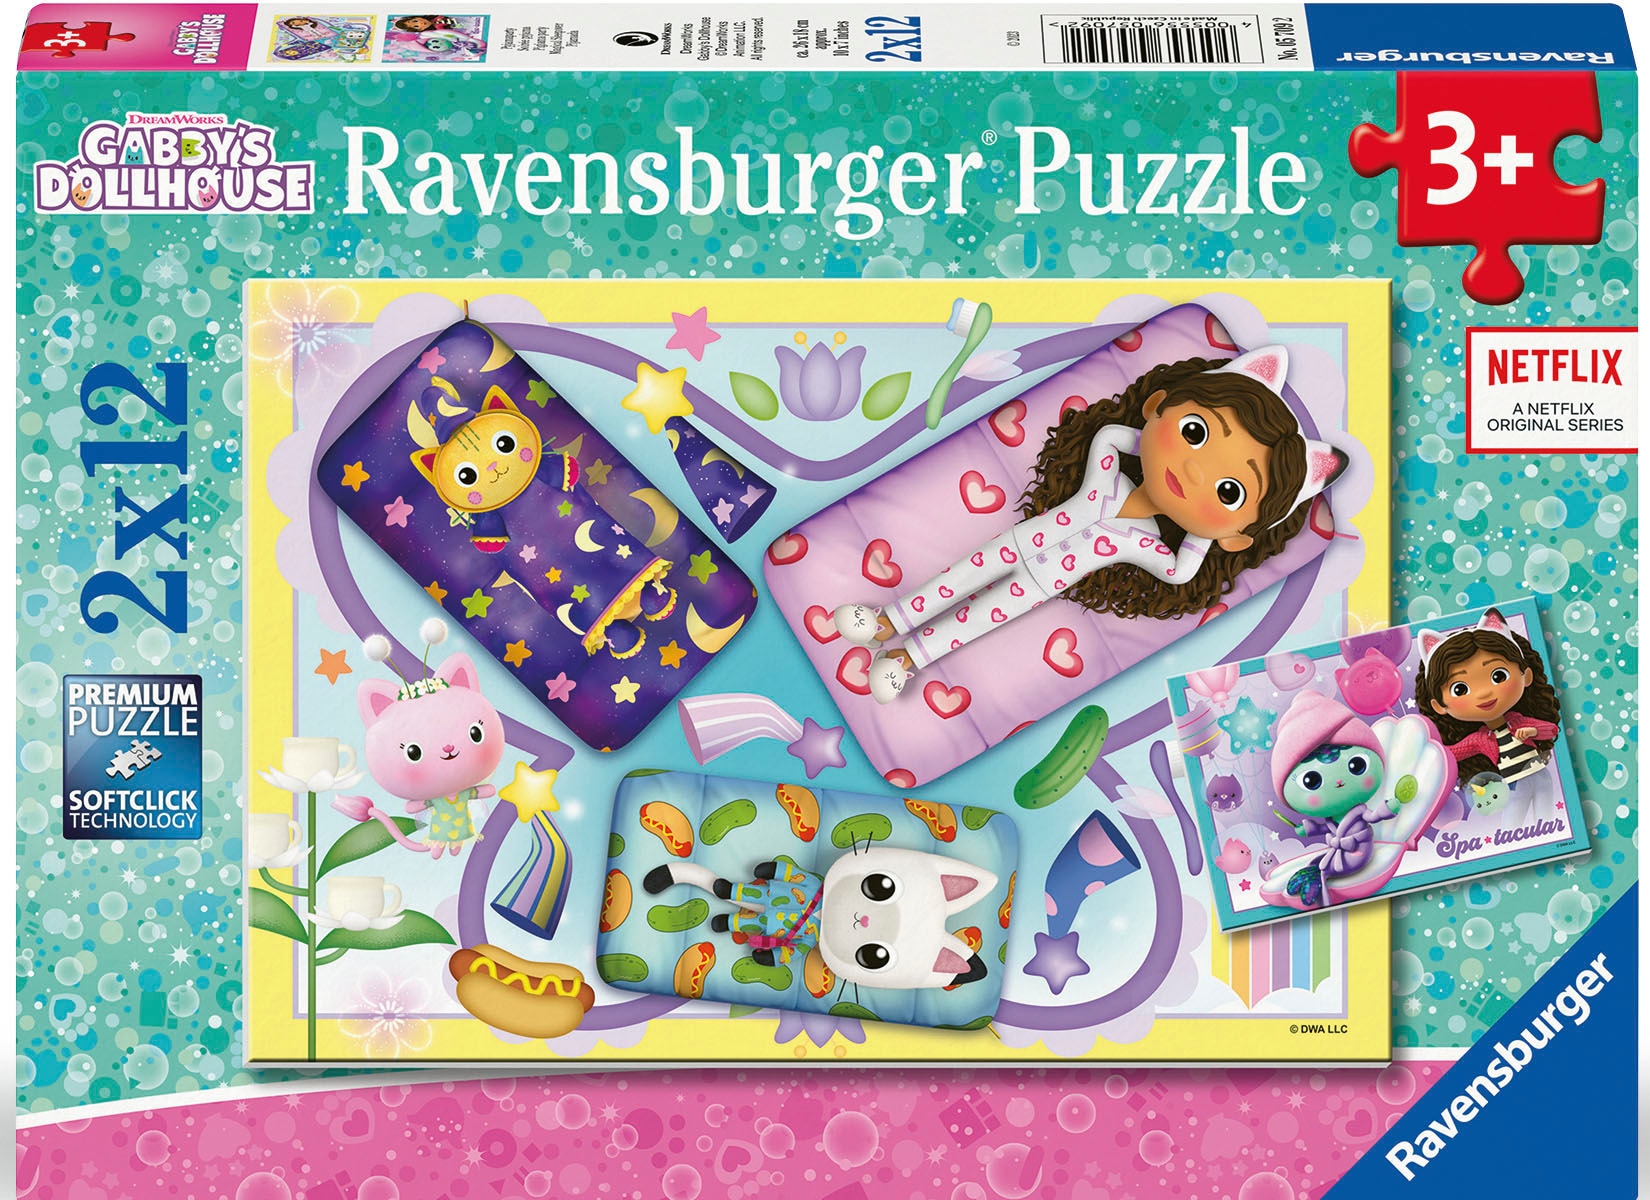 Ravensburger Puzzle »Gabby's Dollhouse, 2x12«, Made in Europe